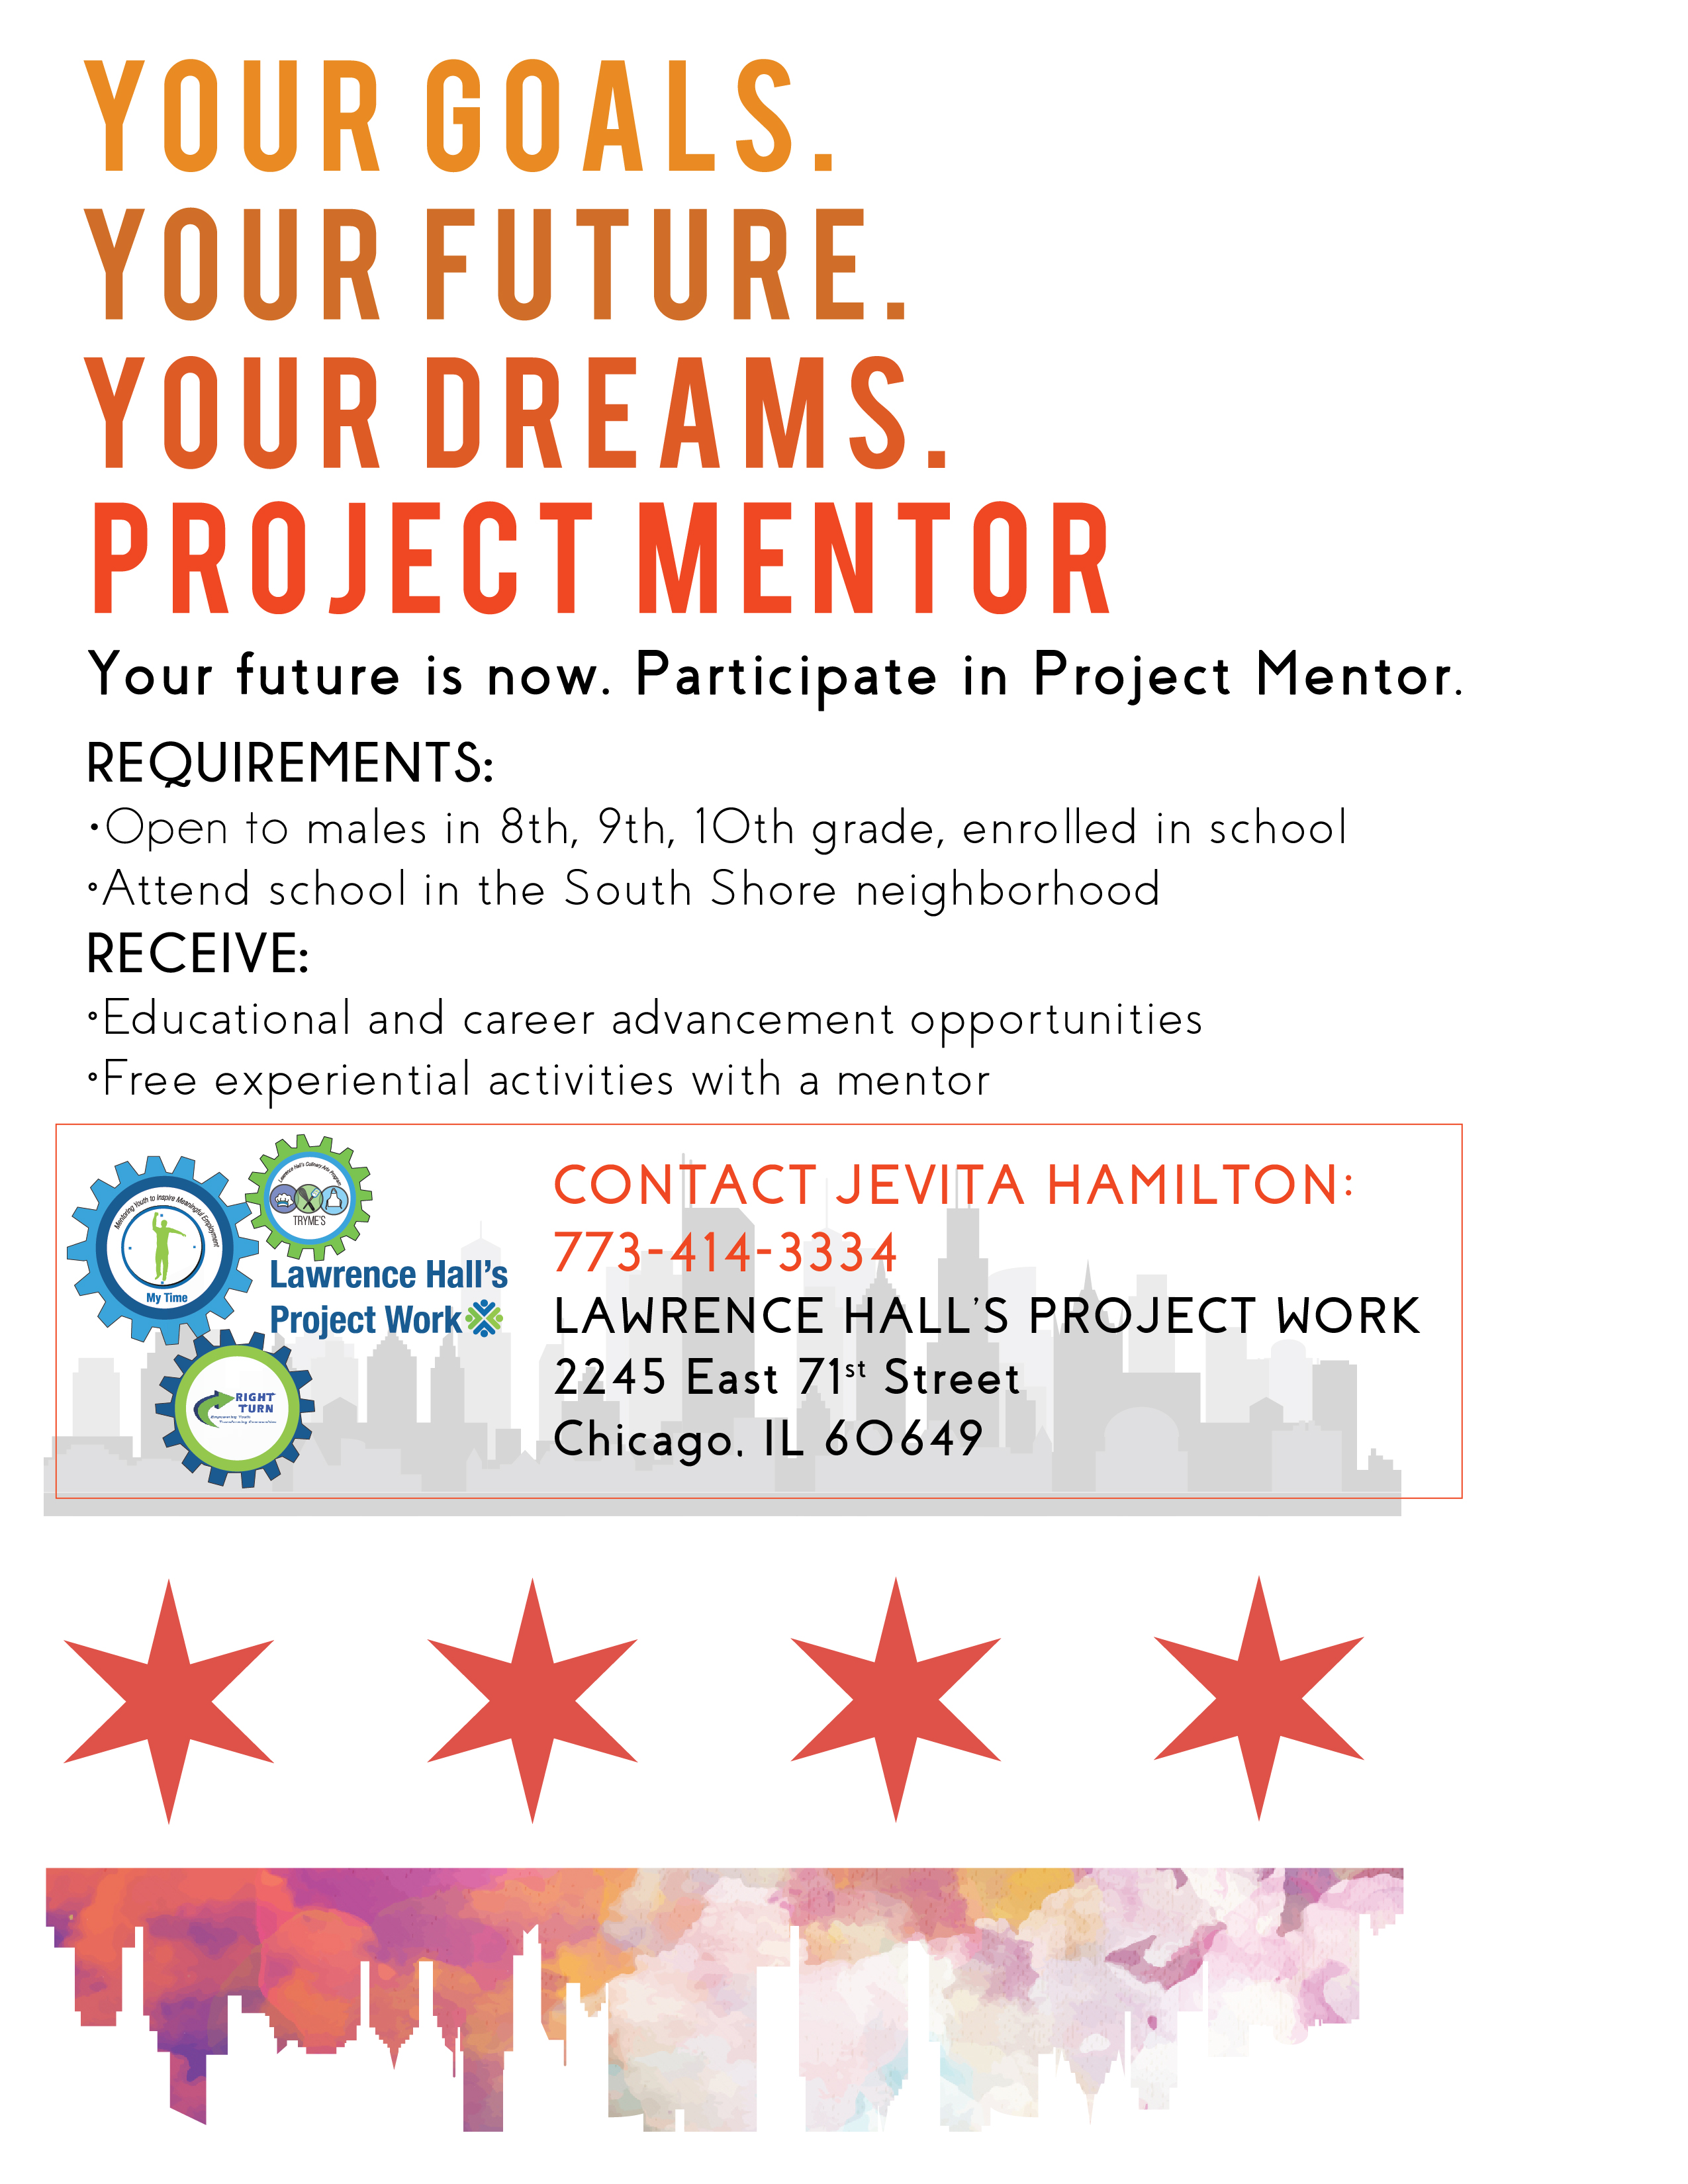 Lawrence Hall PROJECT MENTOR in South Shore - Lawrence Hall